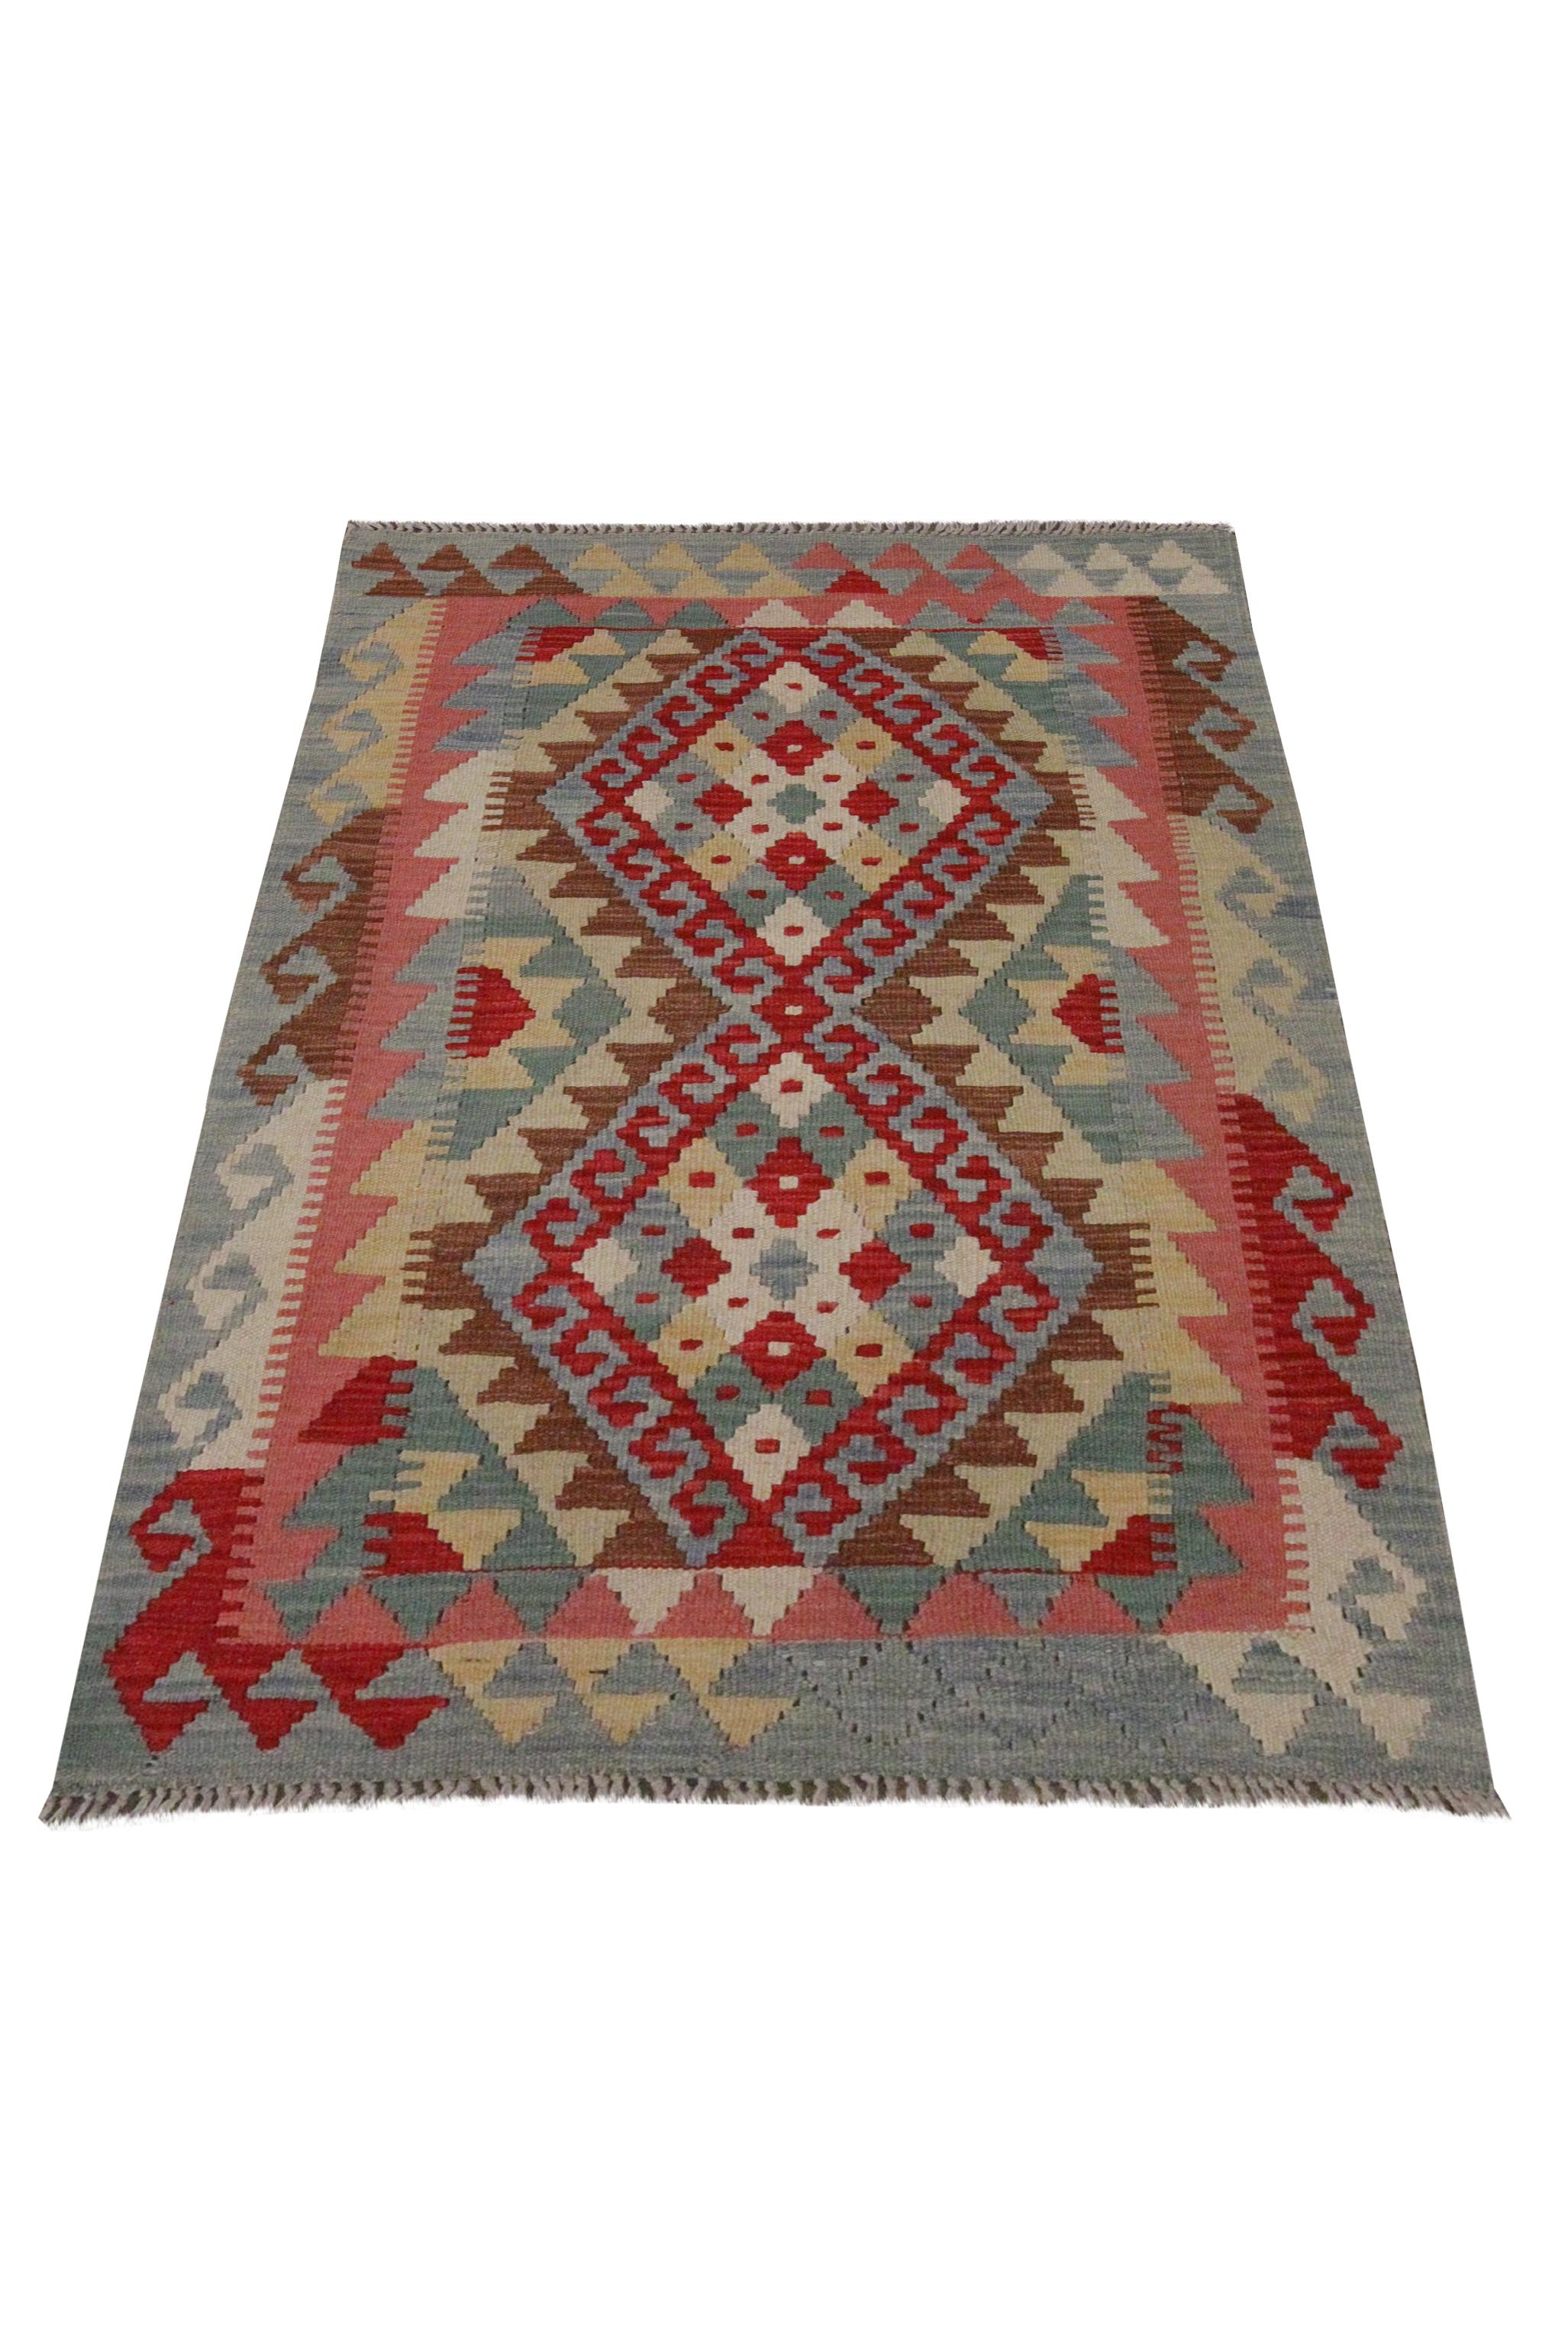 A bold geometric design has been woven in this fine wool kilim rug. Constructed in the early 21st century, in Afghanistan. It features a bold colour palette with accents of red, beige and blue. The bold geometric design, pattern and colours in this